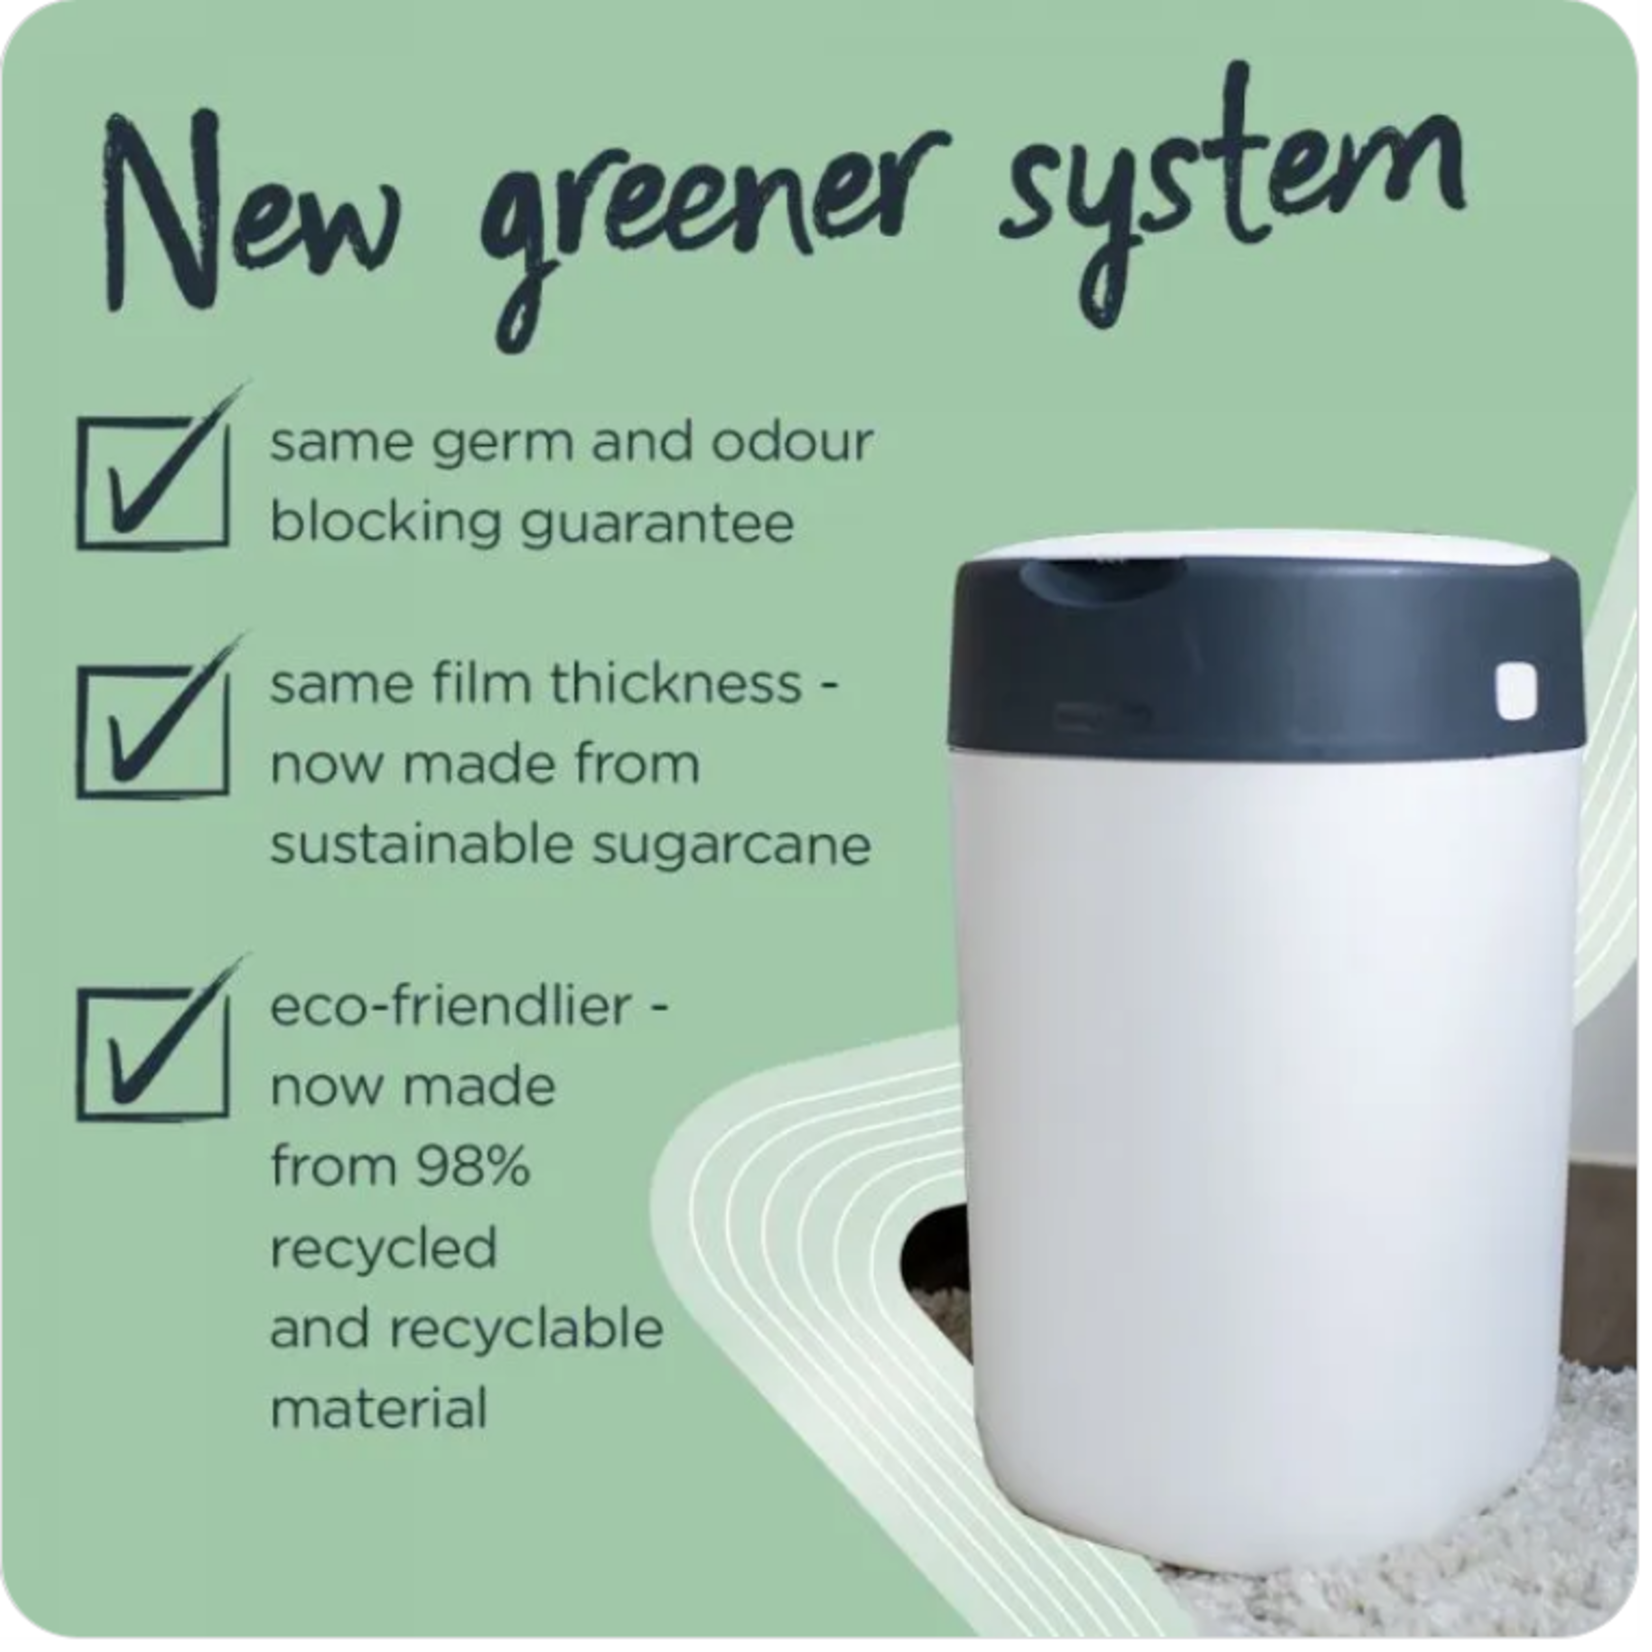 Tommee Tippee Twist & Click Nappy Disposal Bin-White